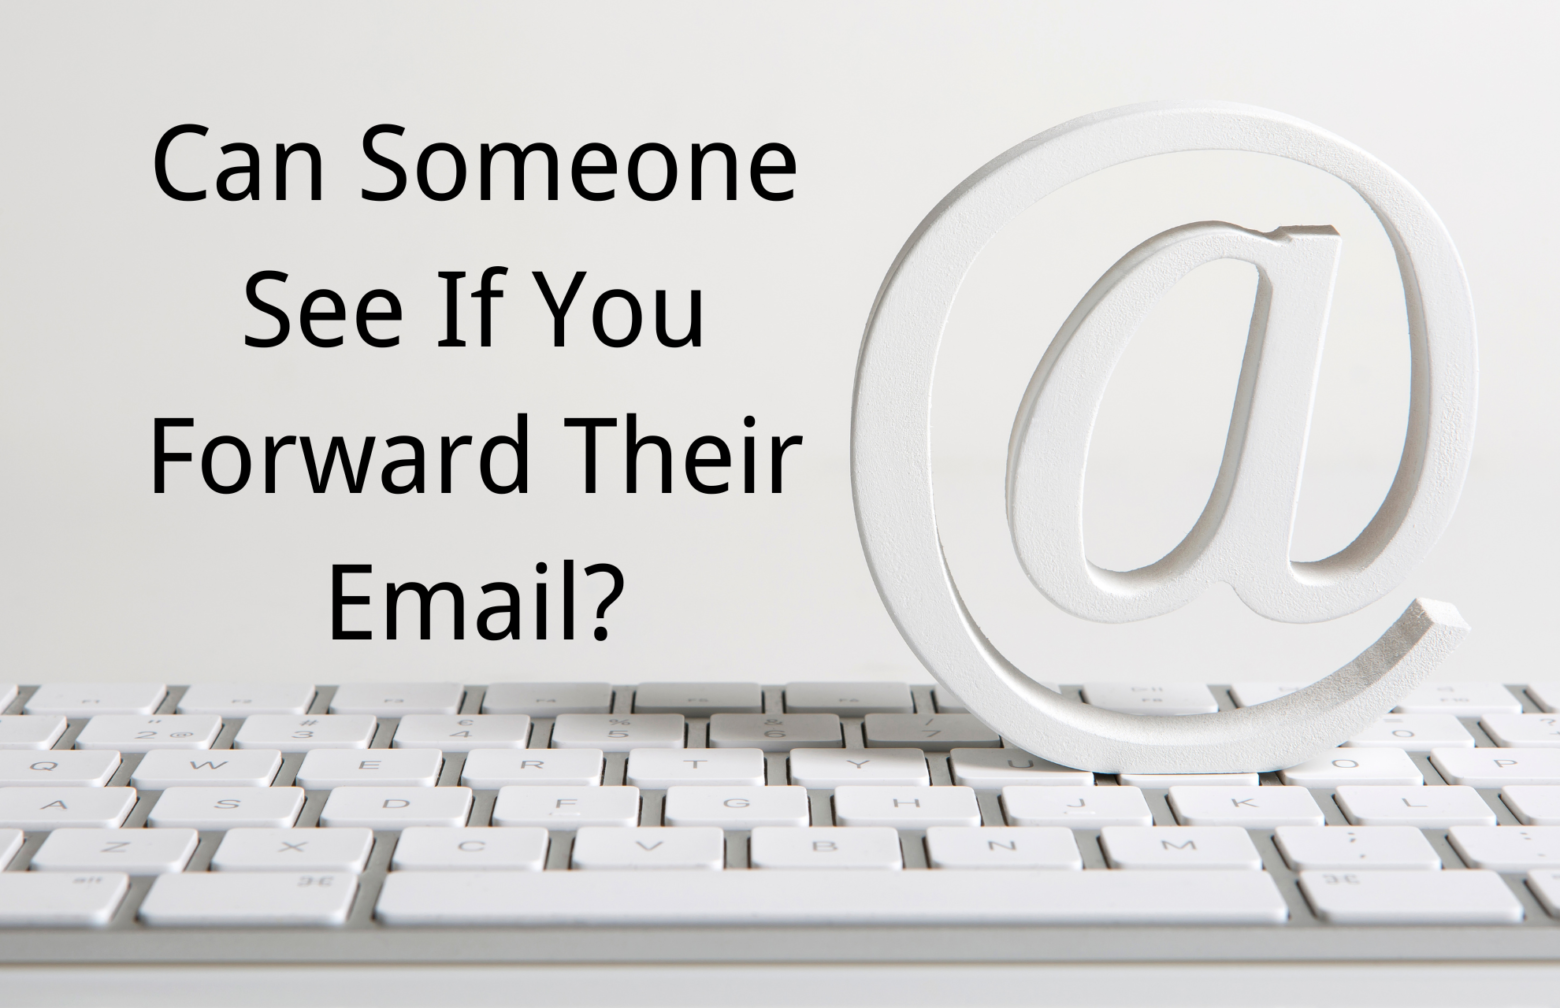 Can Someone See If You Forward Their Email?